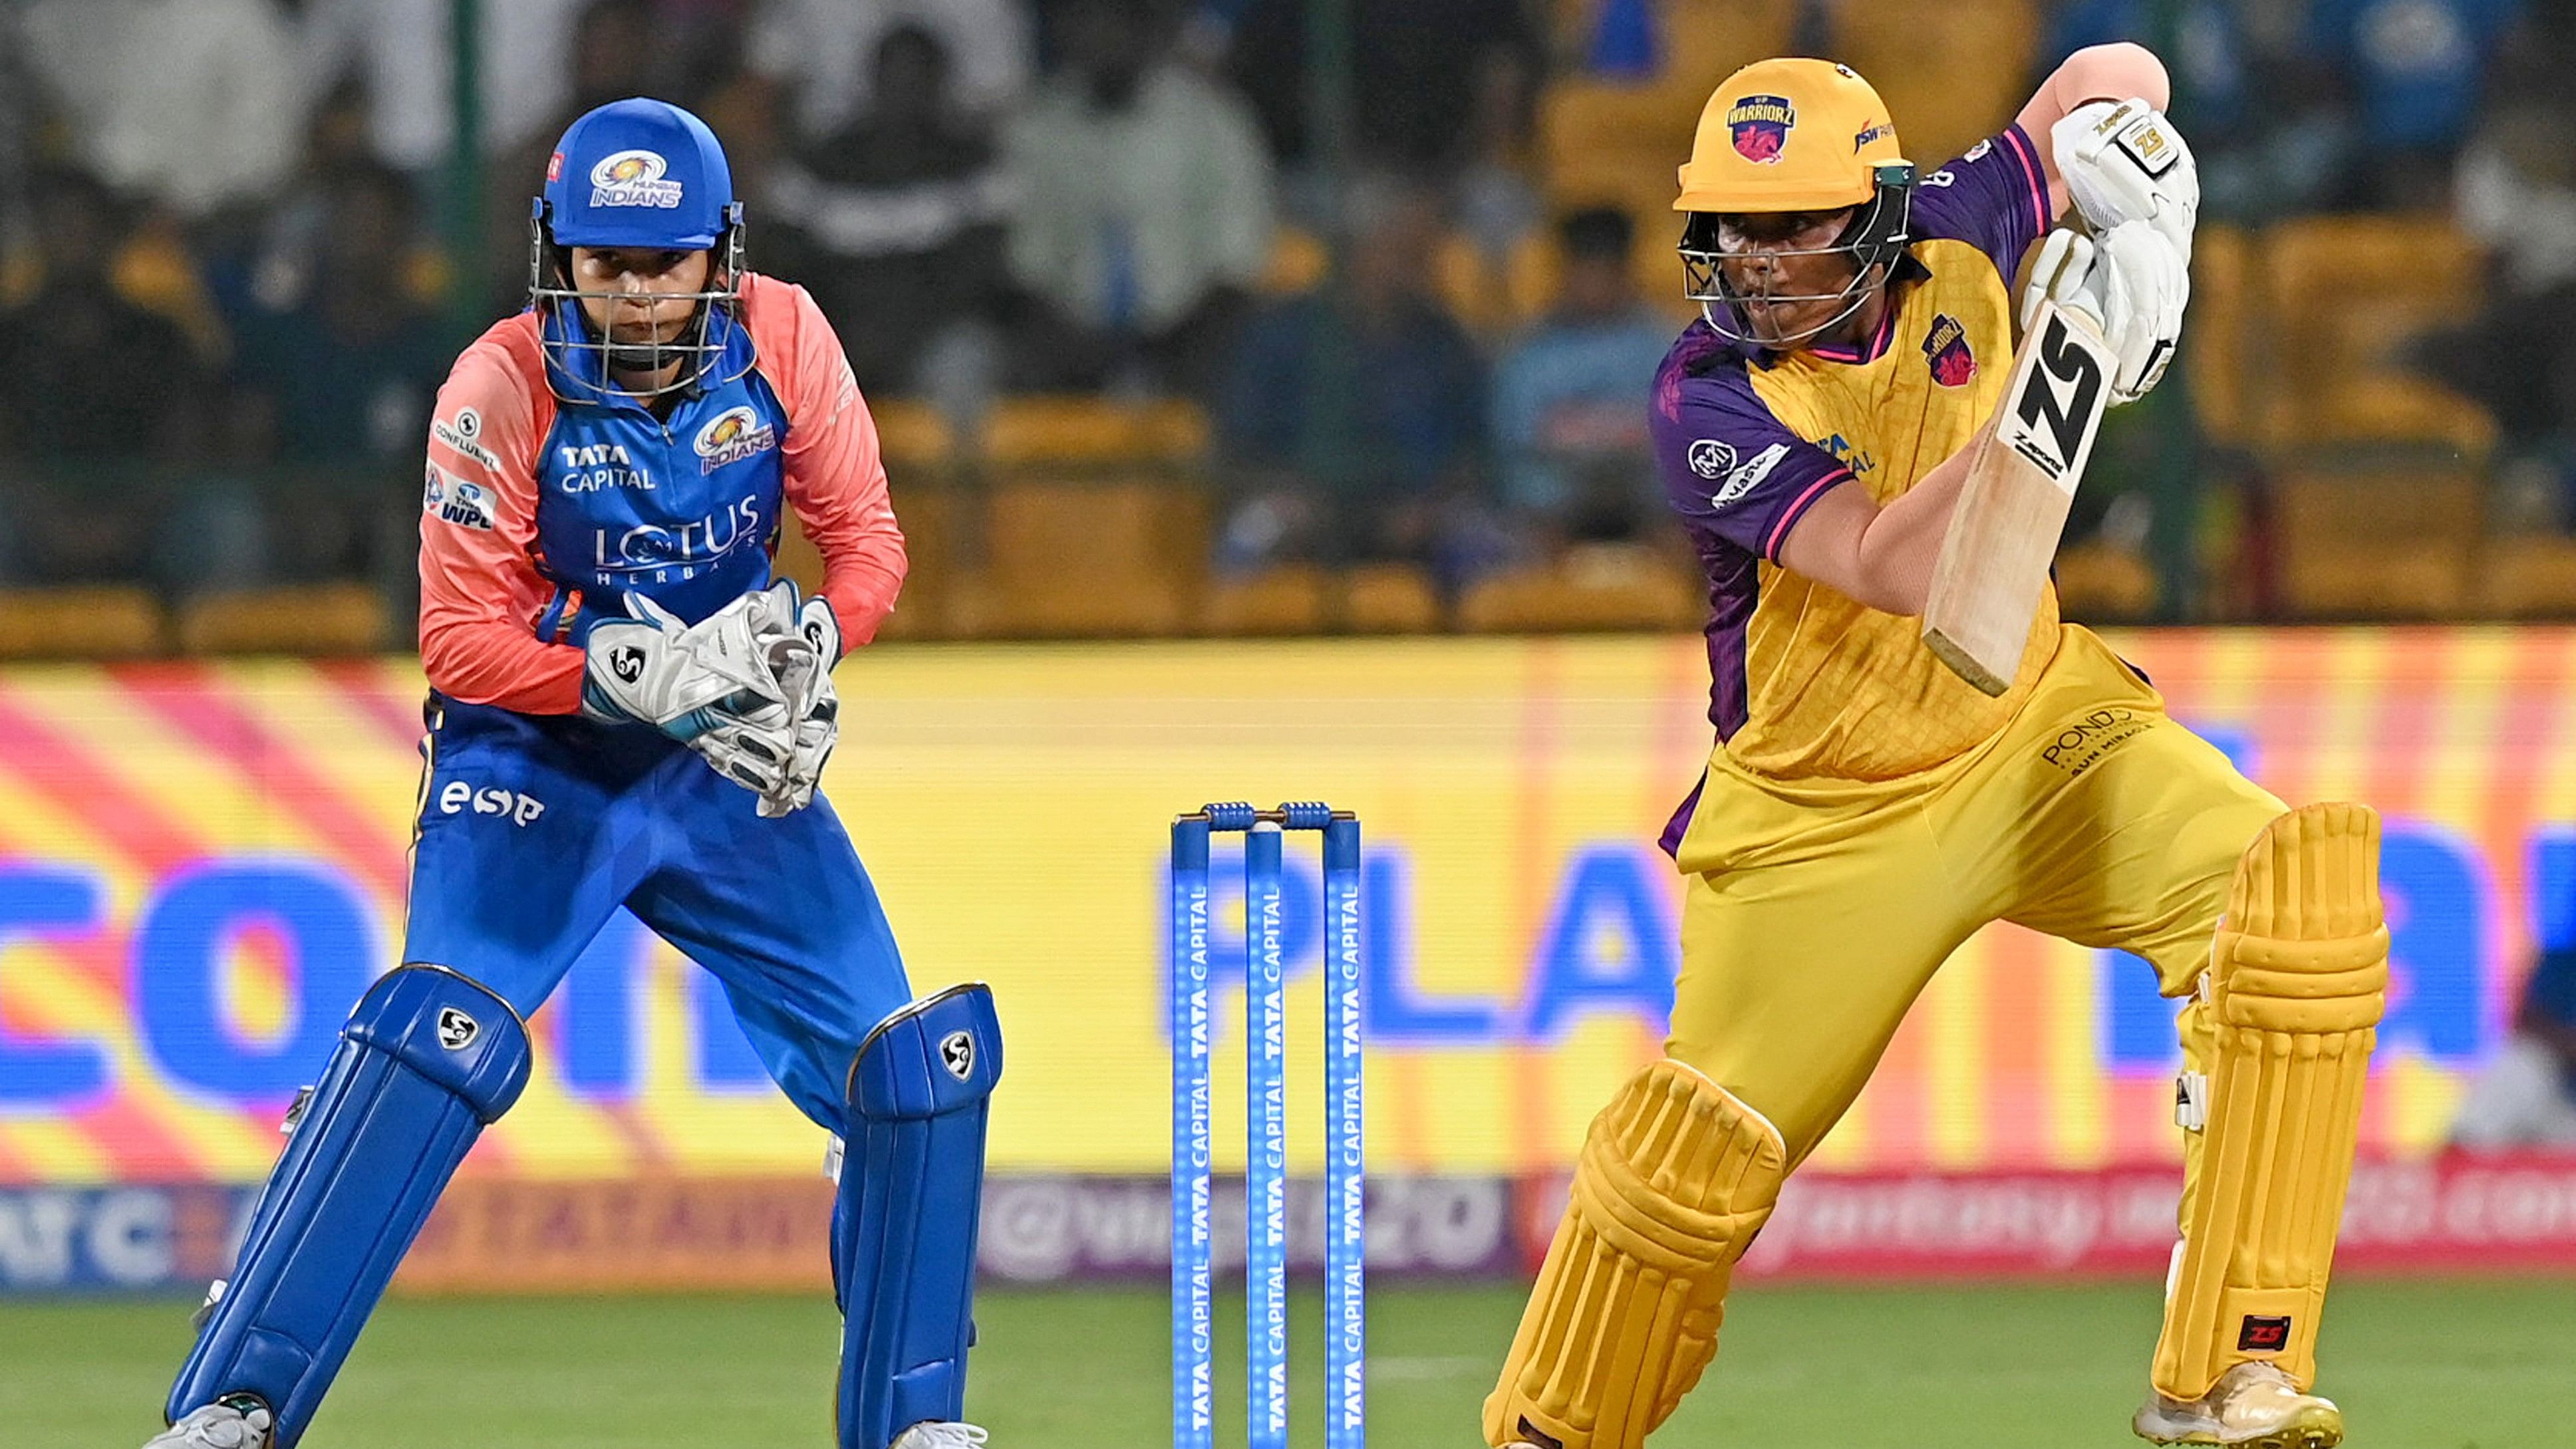 <div class="paragraphs"><p>UP Warriorz’s Kiran Navgire (right) punches one en-route her quick-fire 57 against Mumbai Indians in the WPL at the M Chinnaswamy Stadium in Bengaluru on Wednesday.</p></div>